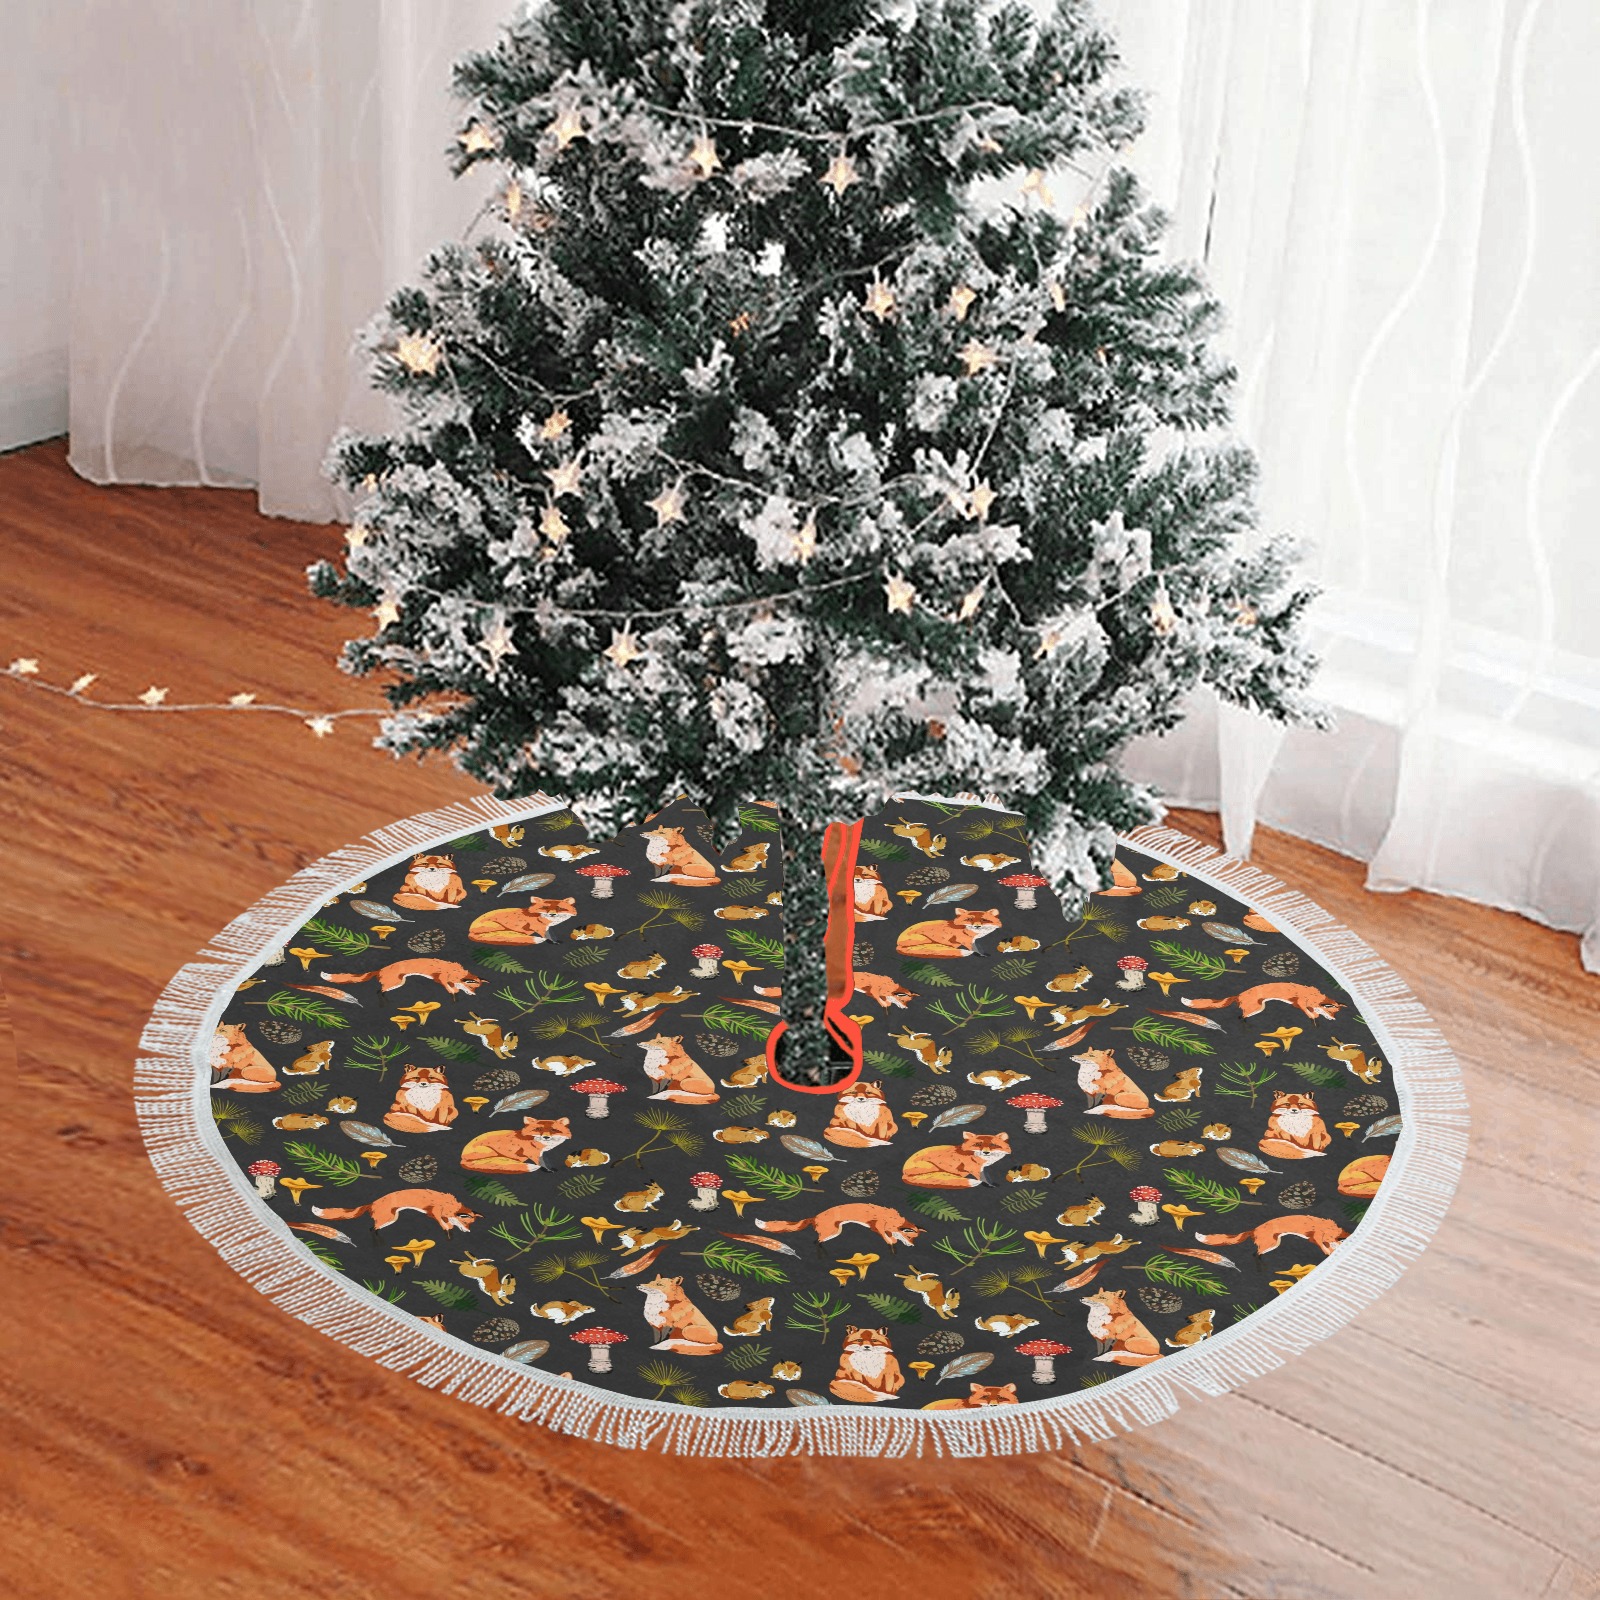 Foxes & rabbits autumn forest II-01 Thick Fringe Christmas Tree Skirt 36"x36"